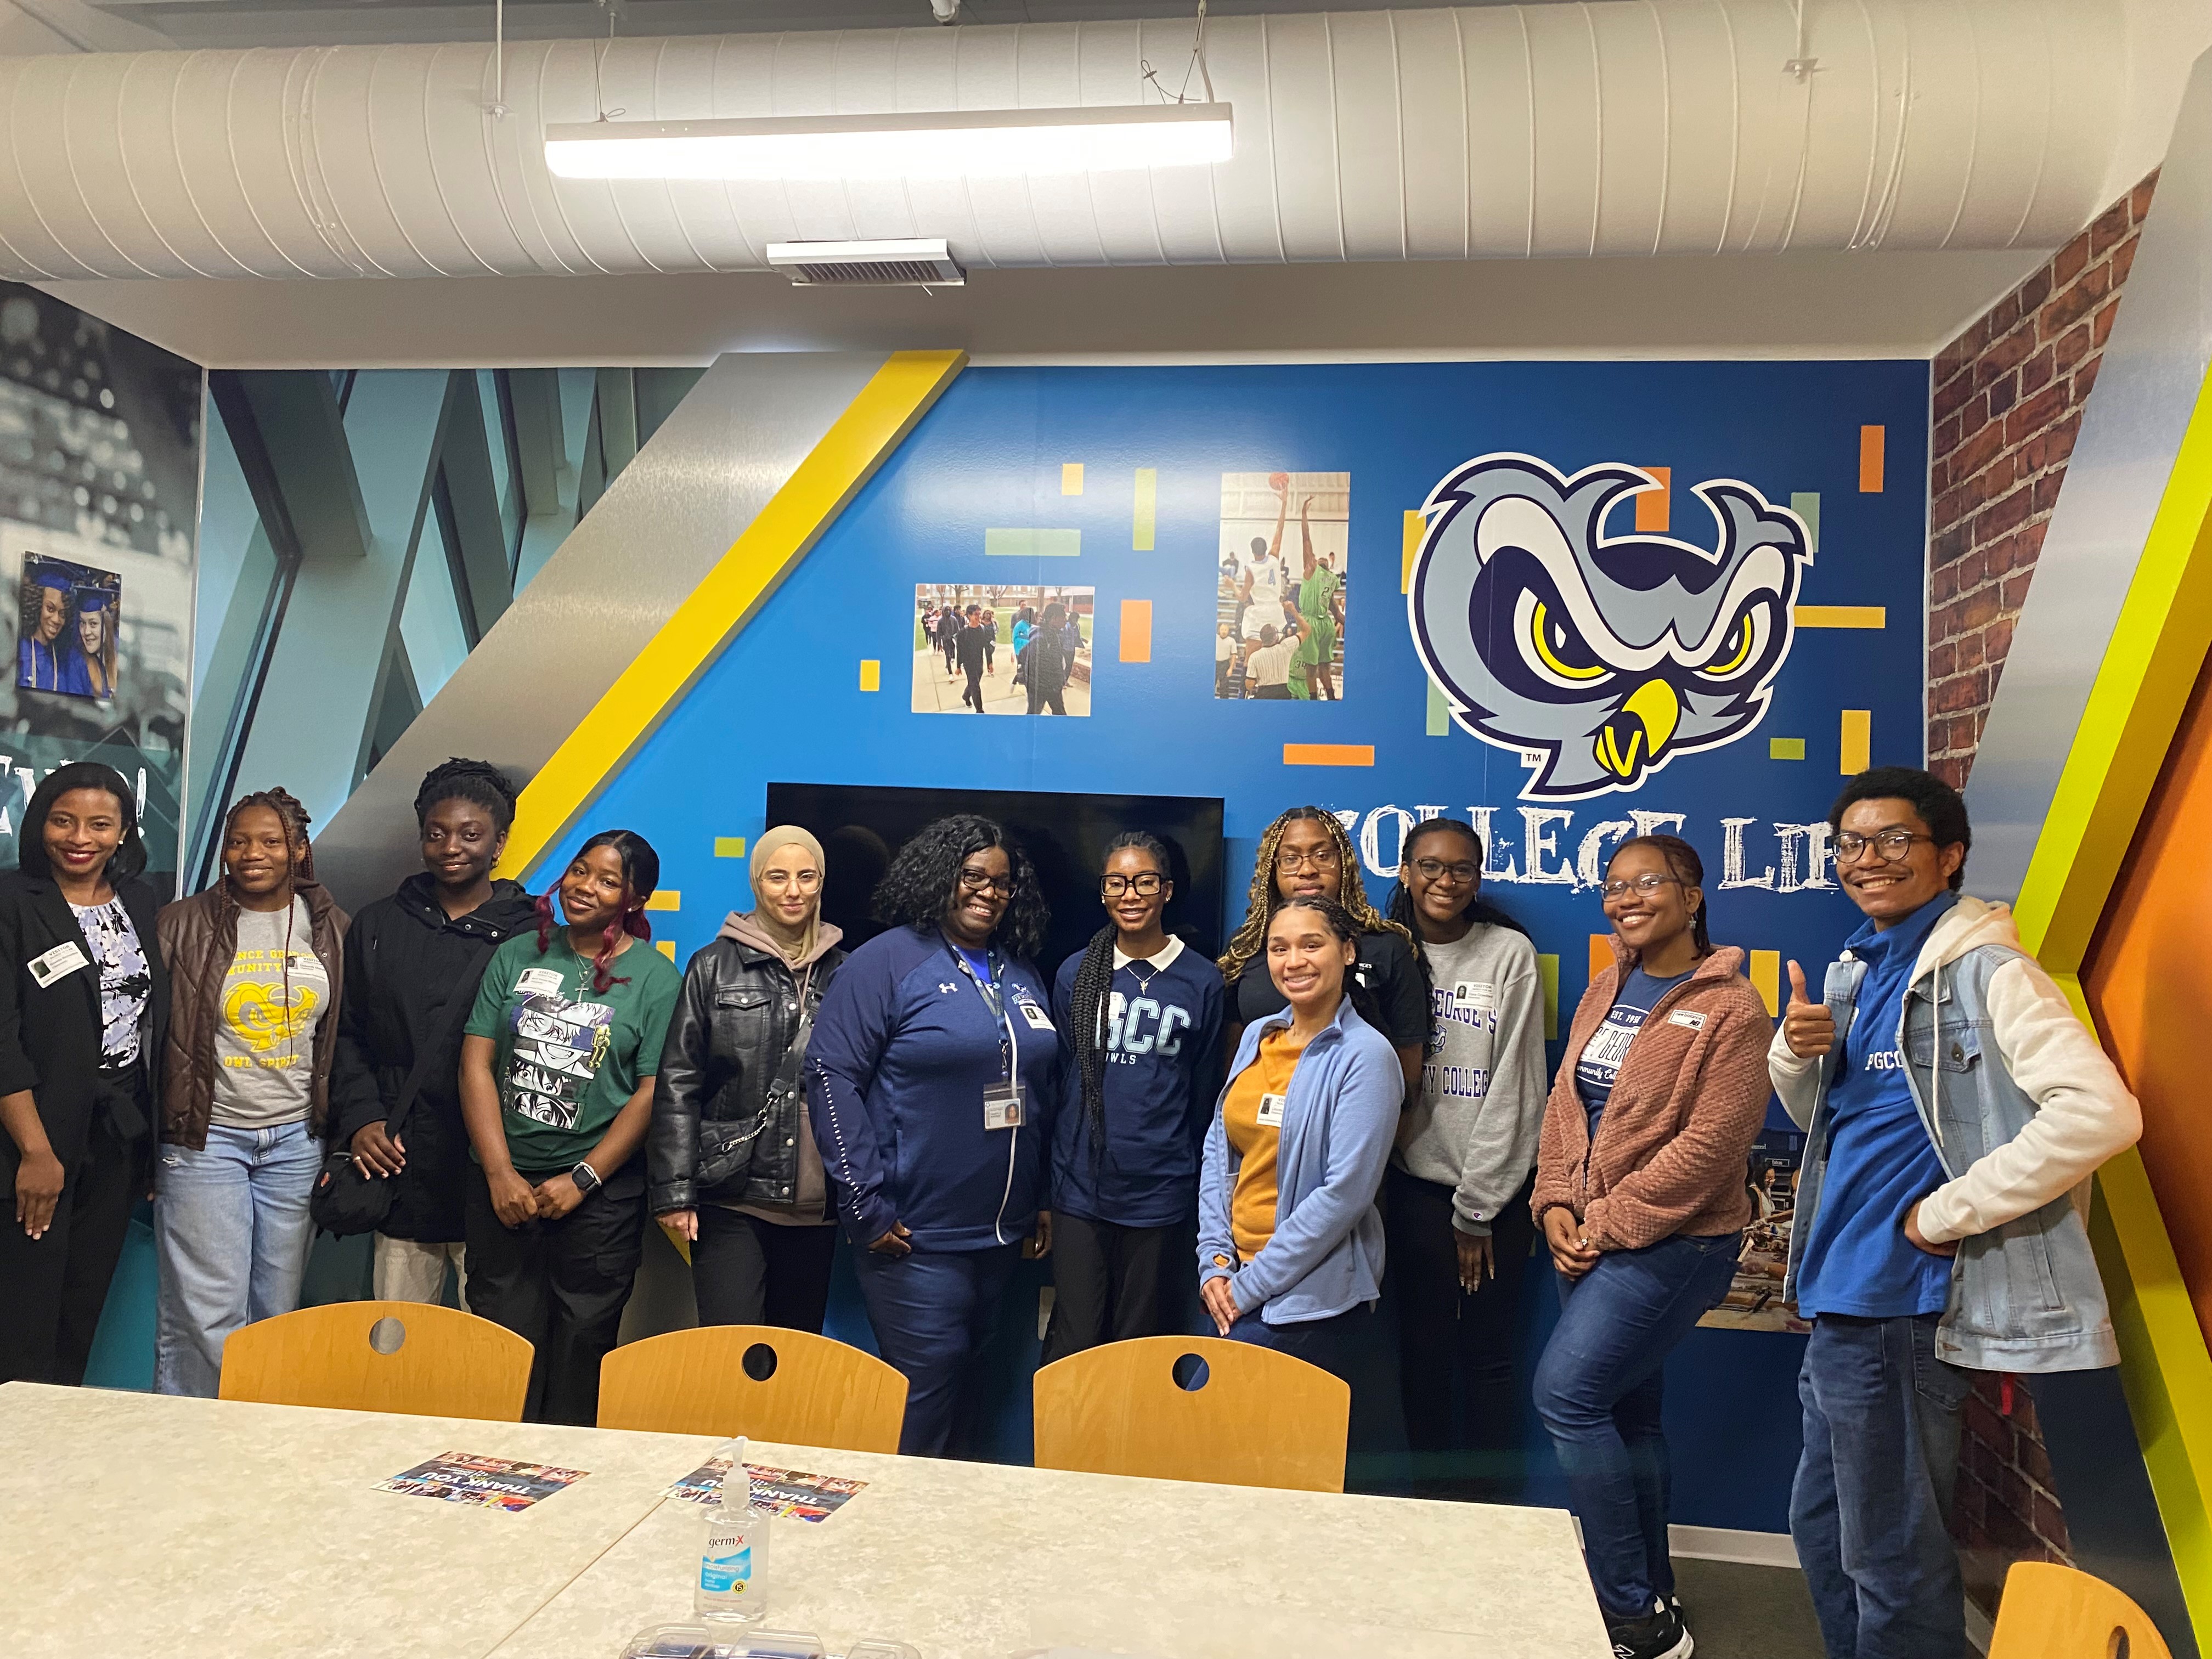 This image is from a volunteer day where students of the College volunteered at Junior Achievement-Finance Park on Friday, April 28, 2023.